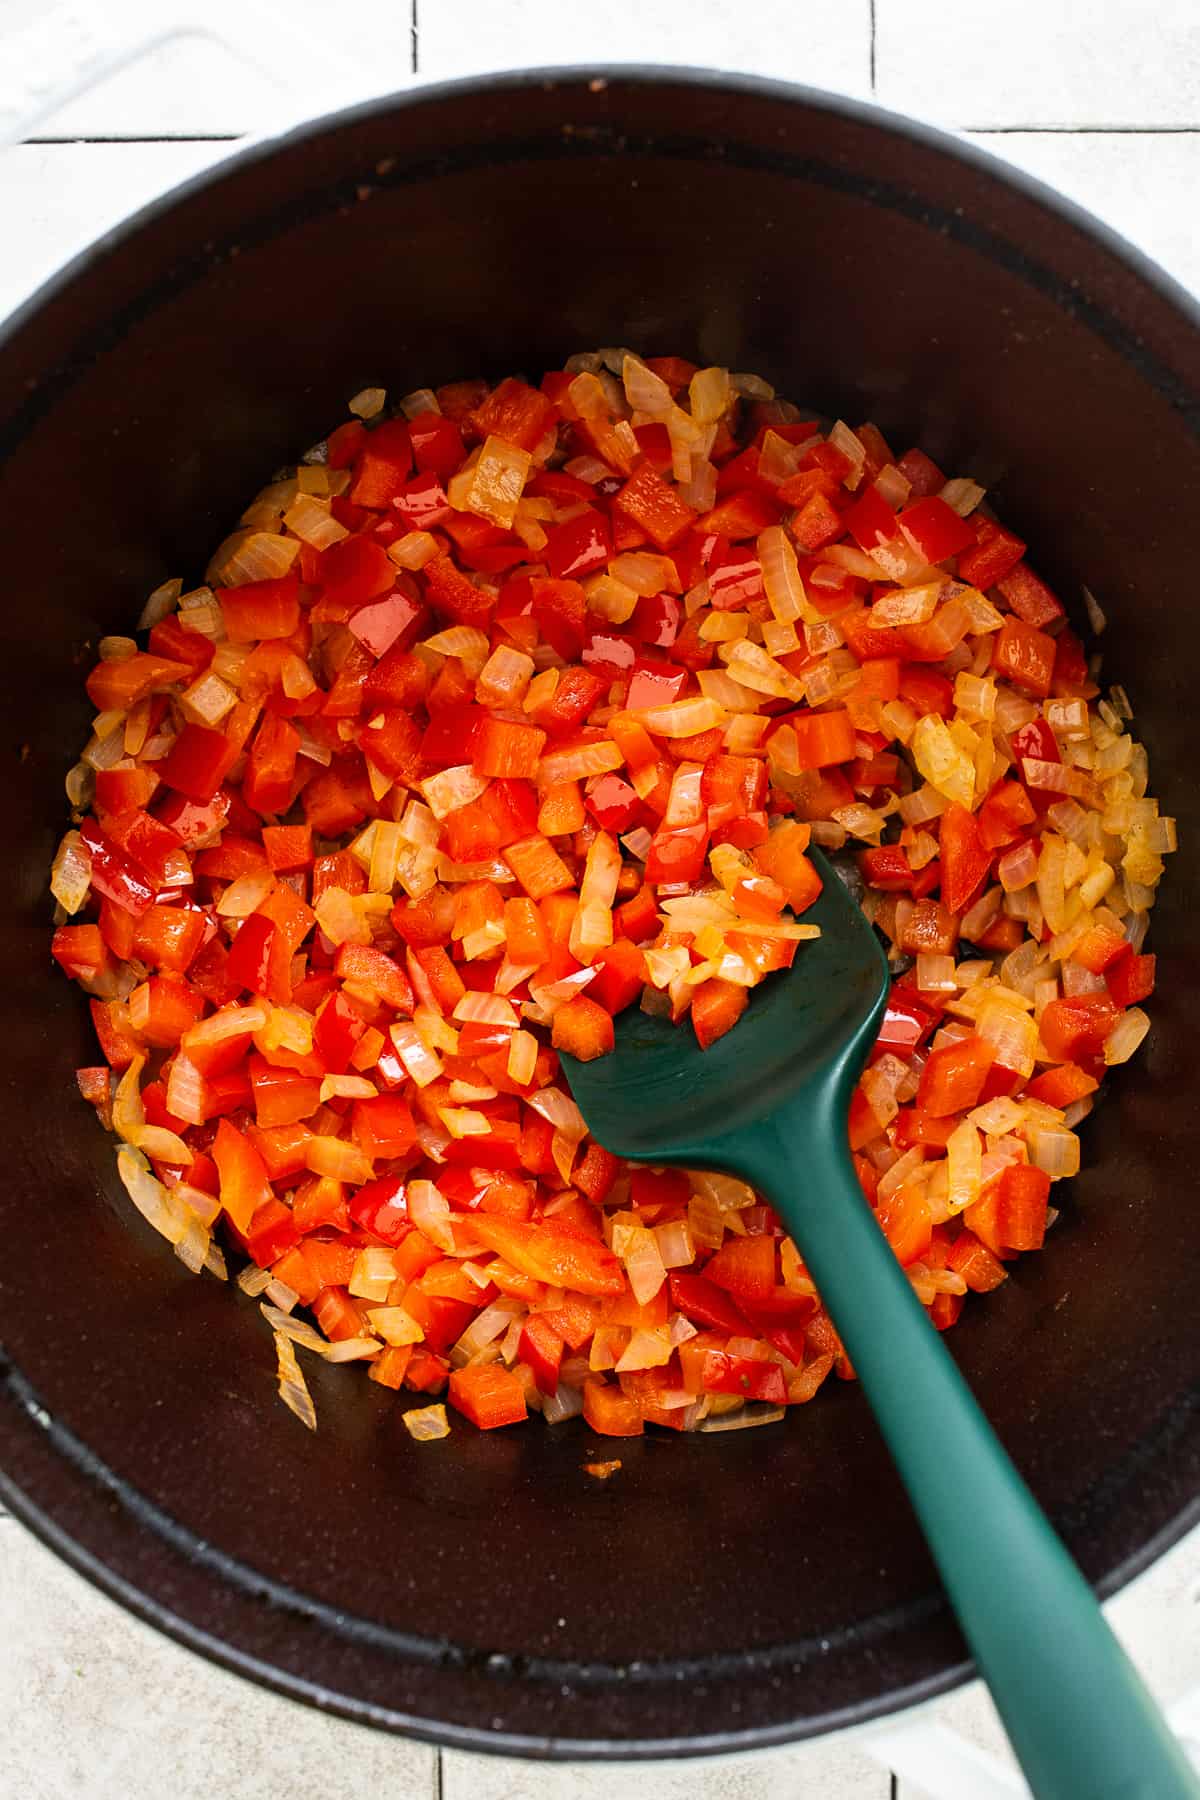 Bell peppers and onions cooked in a pot.